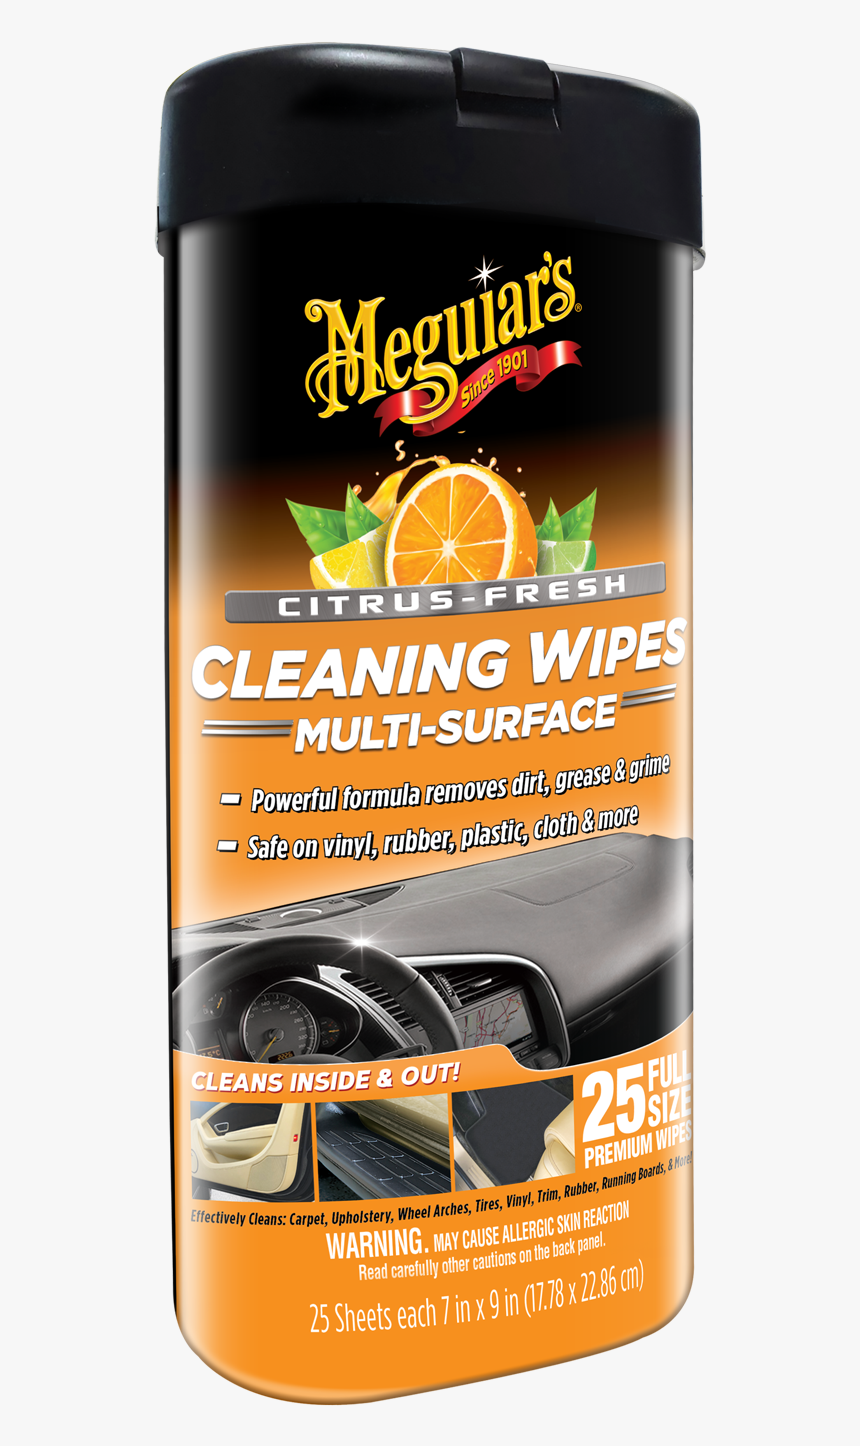 Meguiar"s Citrus-fresh Cleaning Wipes Interior & Exterior - Meguiar's Citrus Fresh Cleaning Wipes Interior &, HD Png Download, Free Download